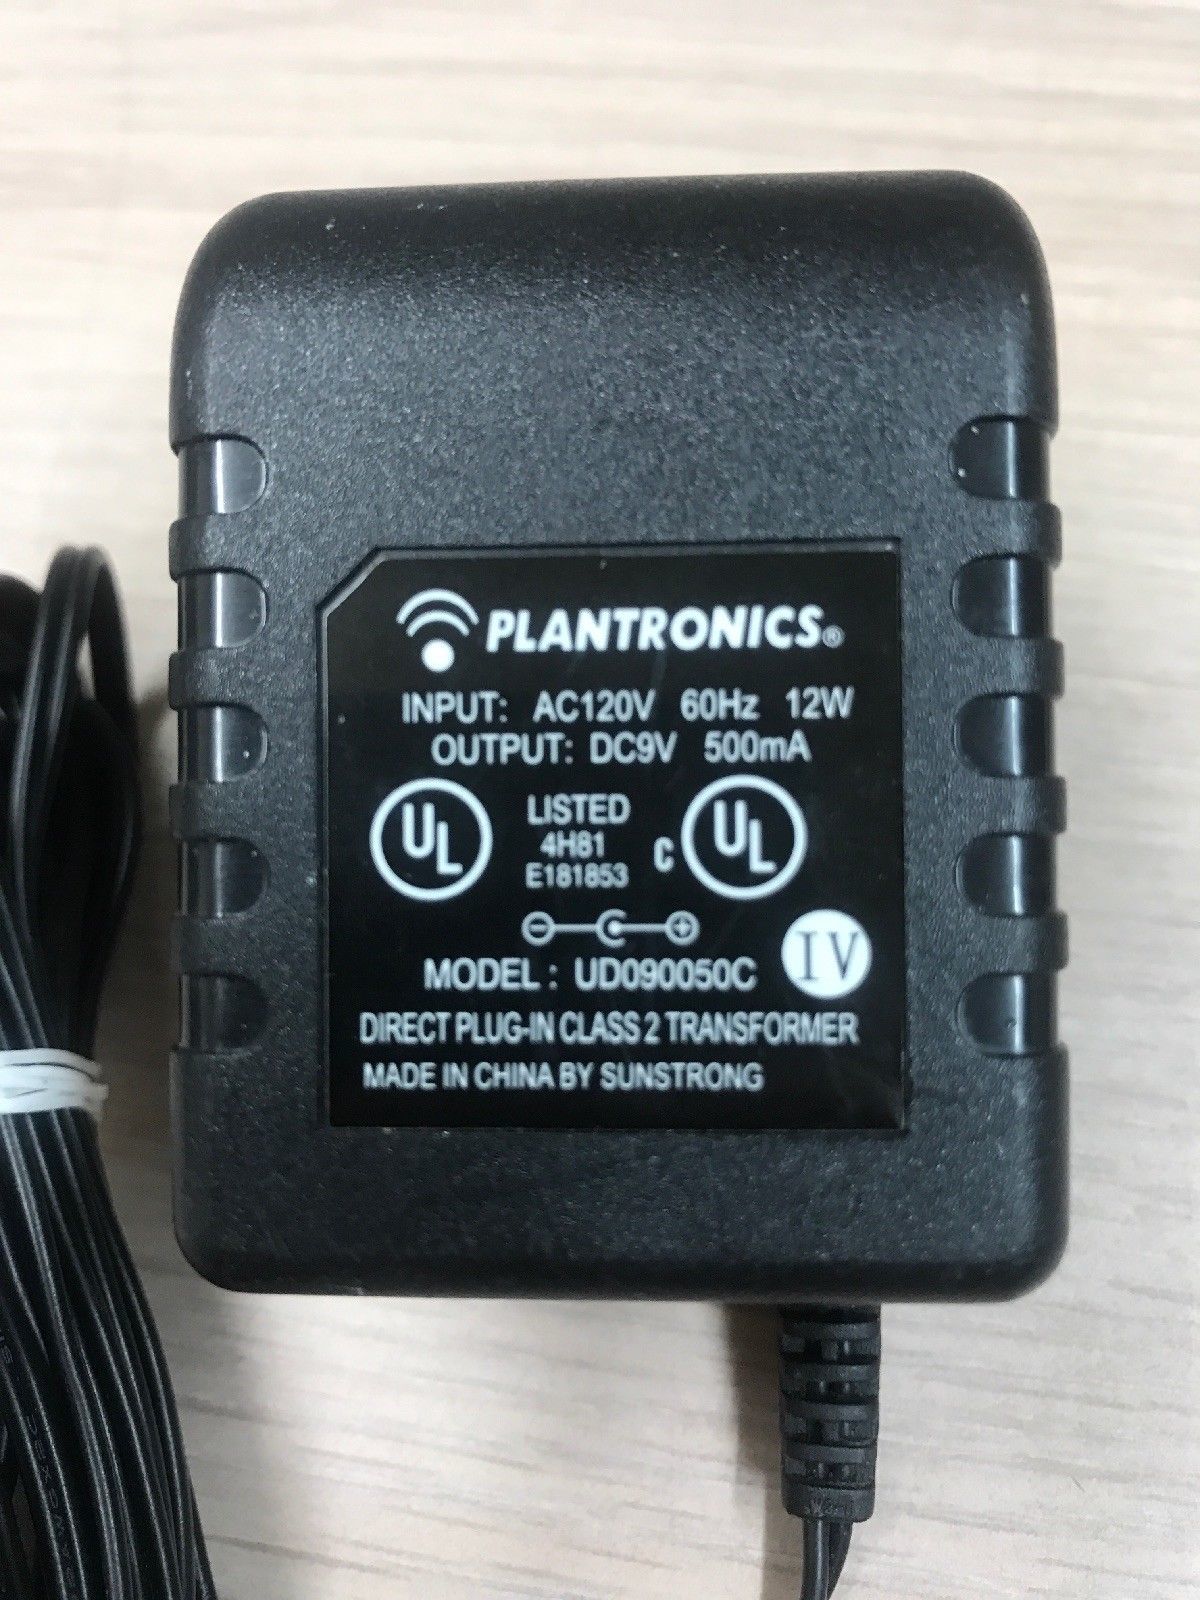 New Plantronics 9VDC 500mA 12W UD090050C AC Power Adapter Charger